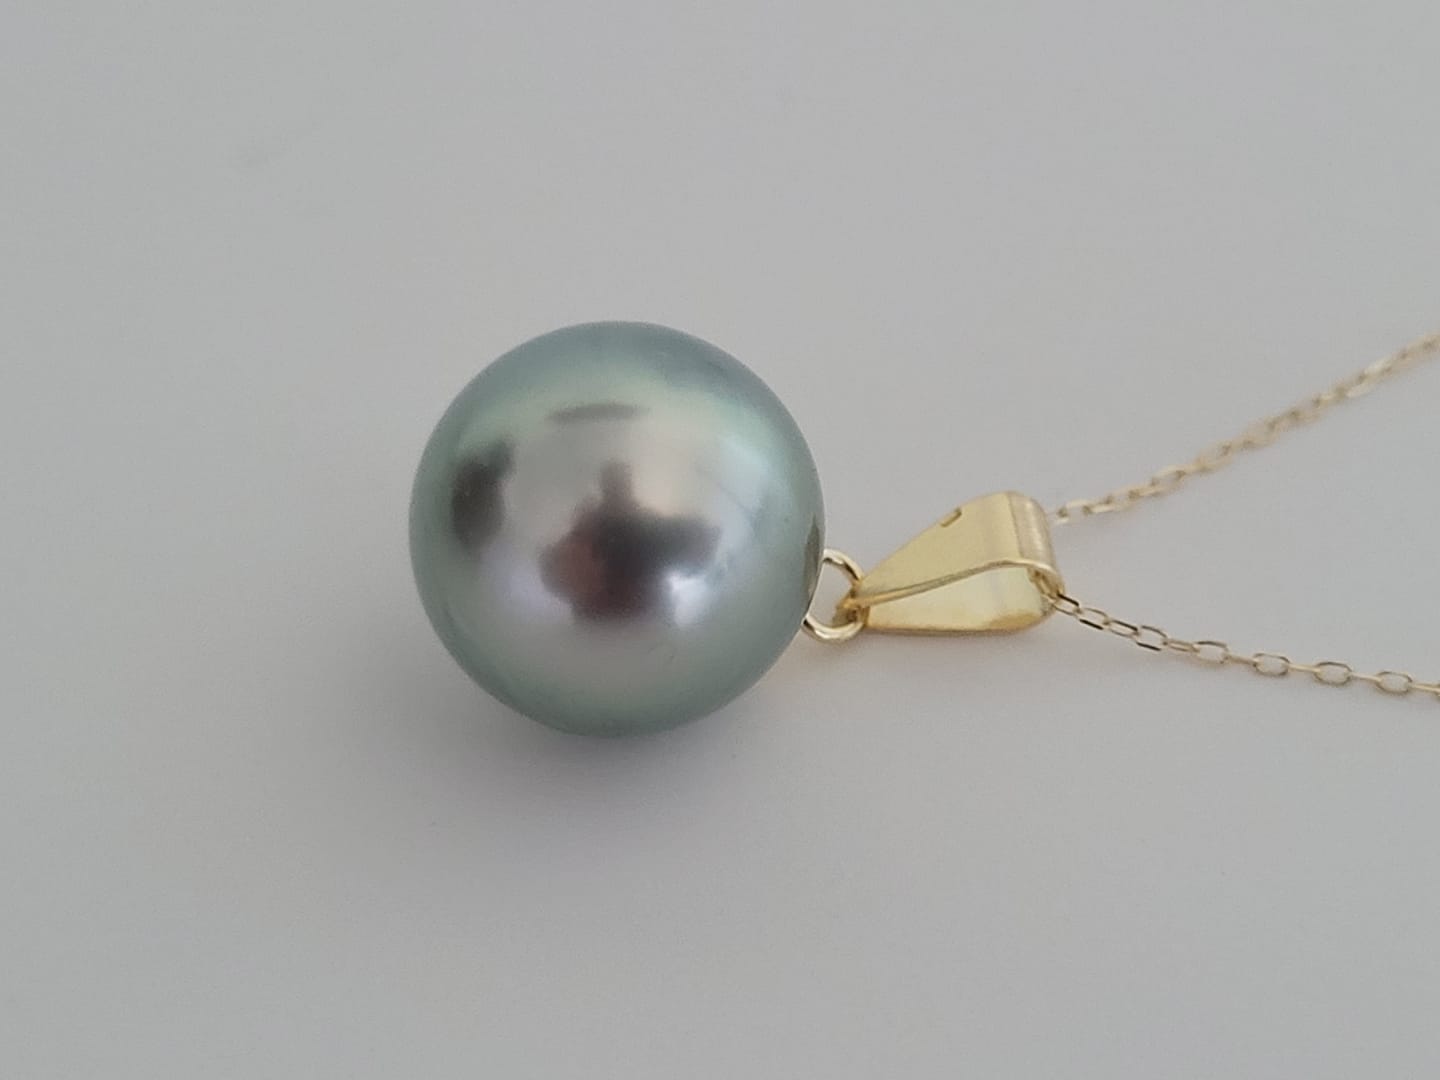 Majestic Pearls: South Sea Pearl Necklace Radiance